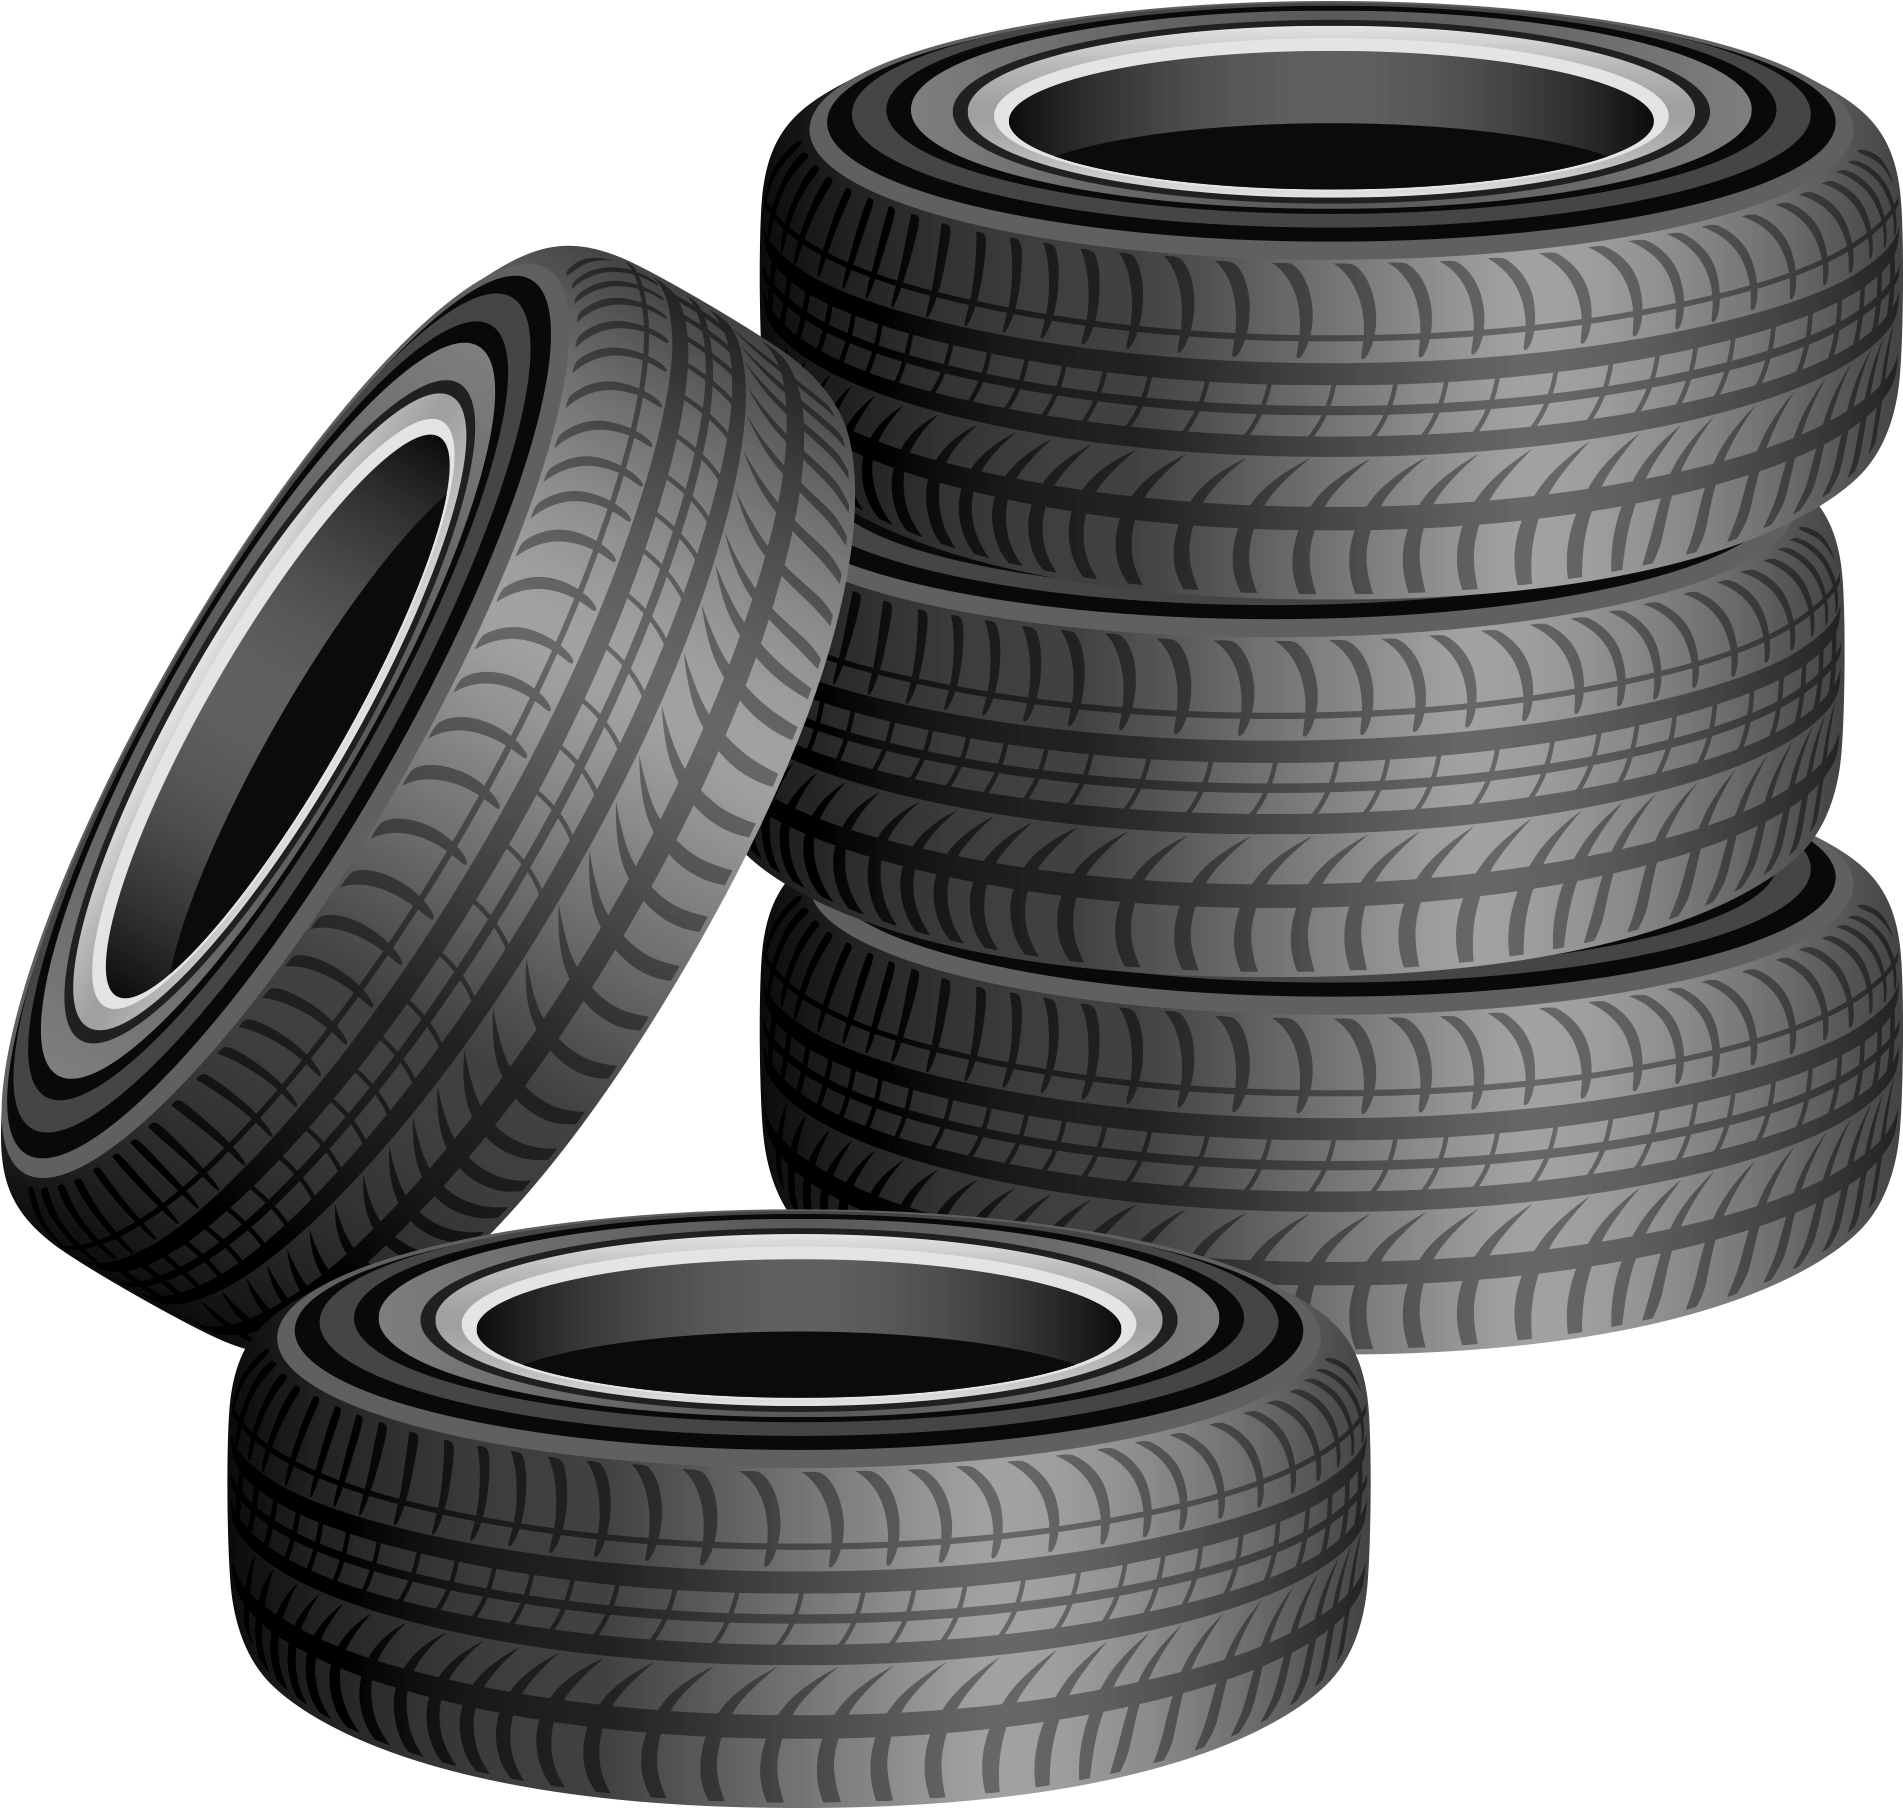 Stacked Car Tyres Illustration